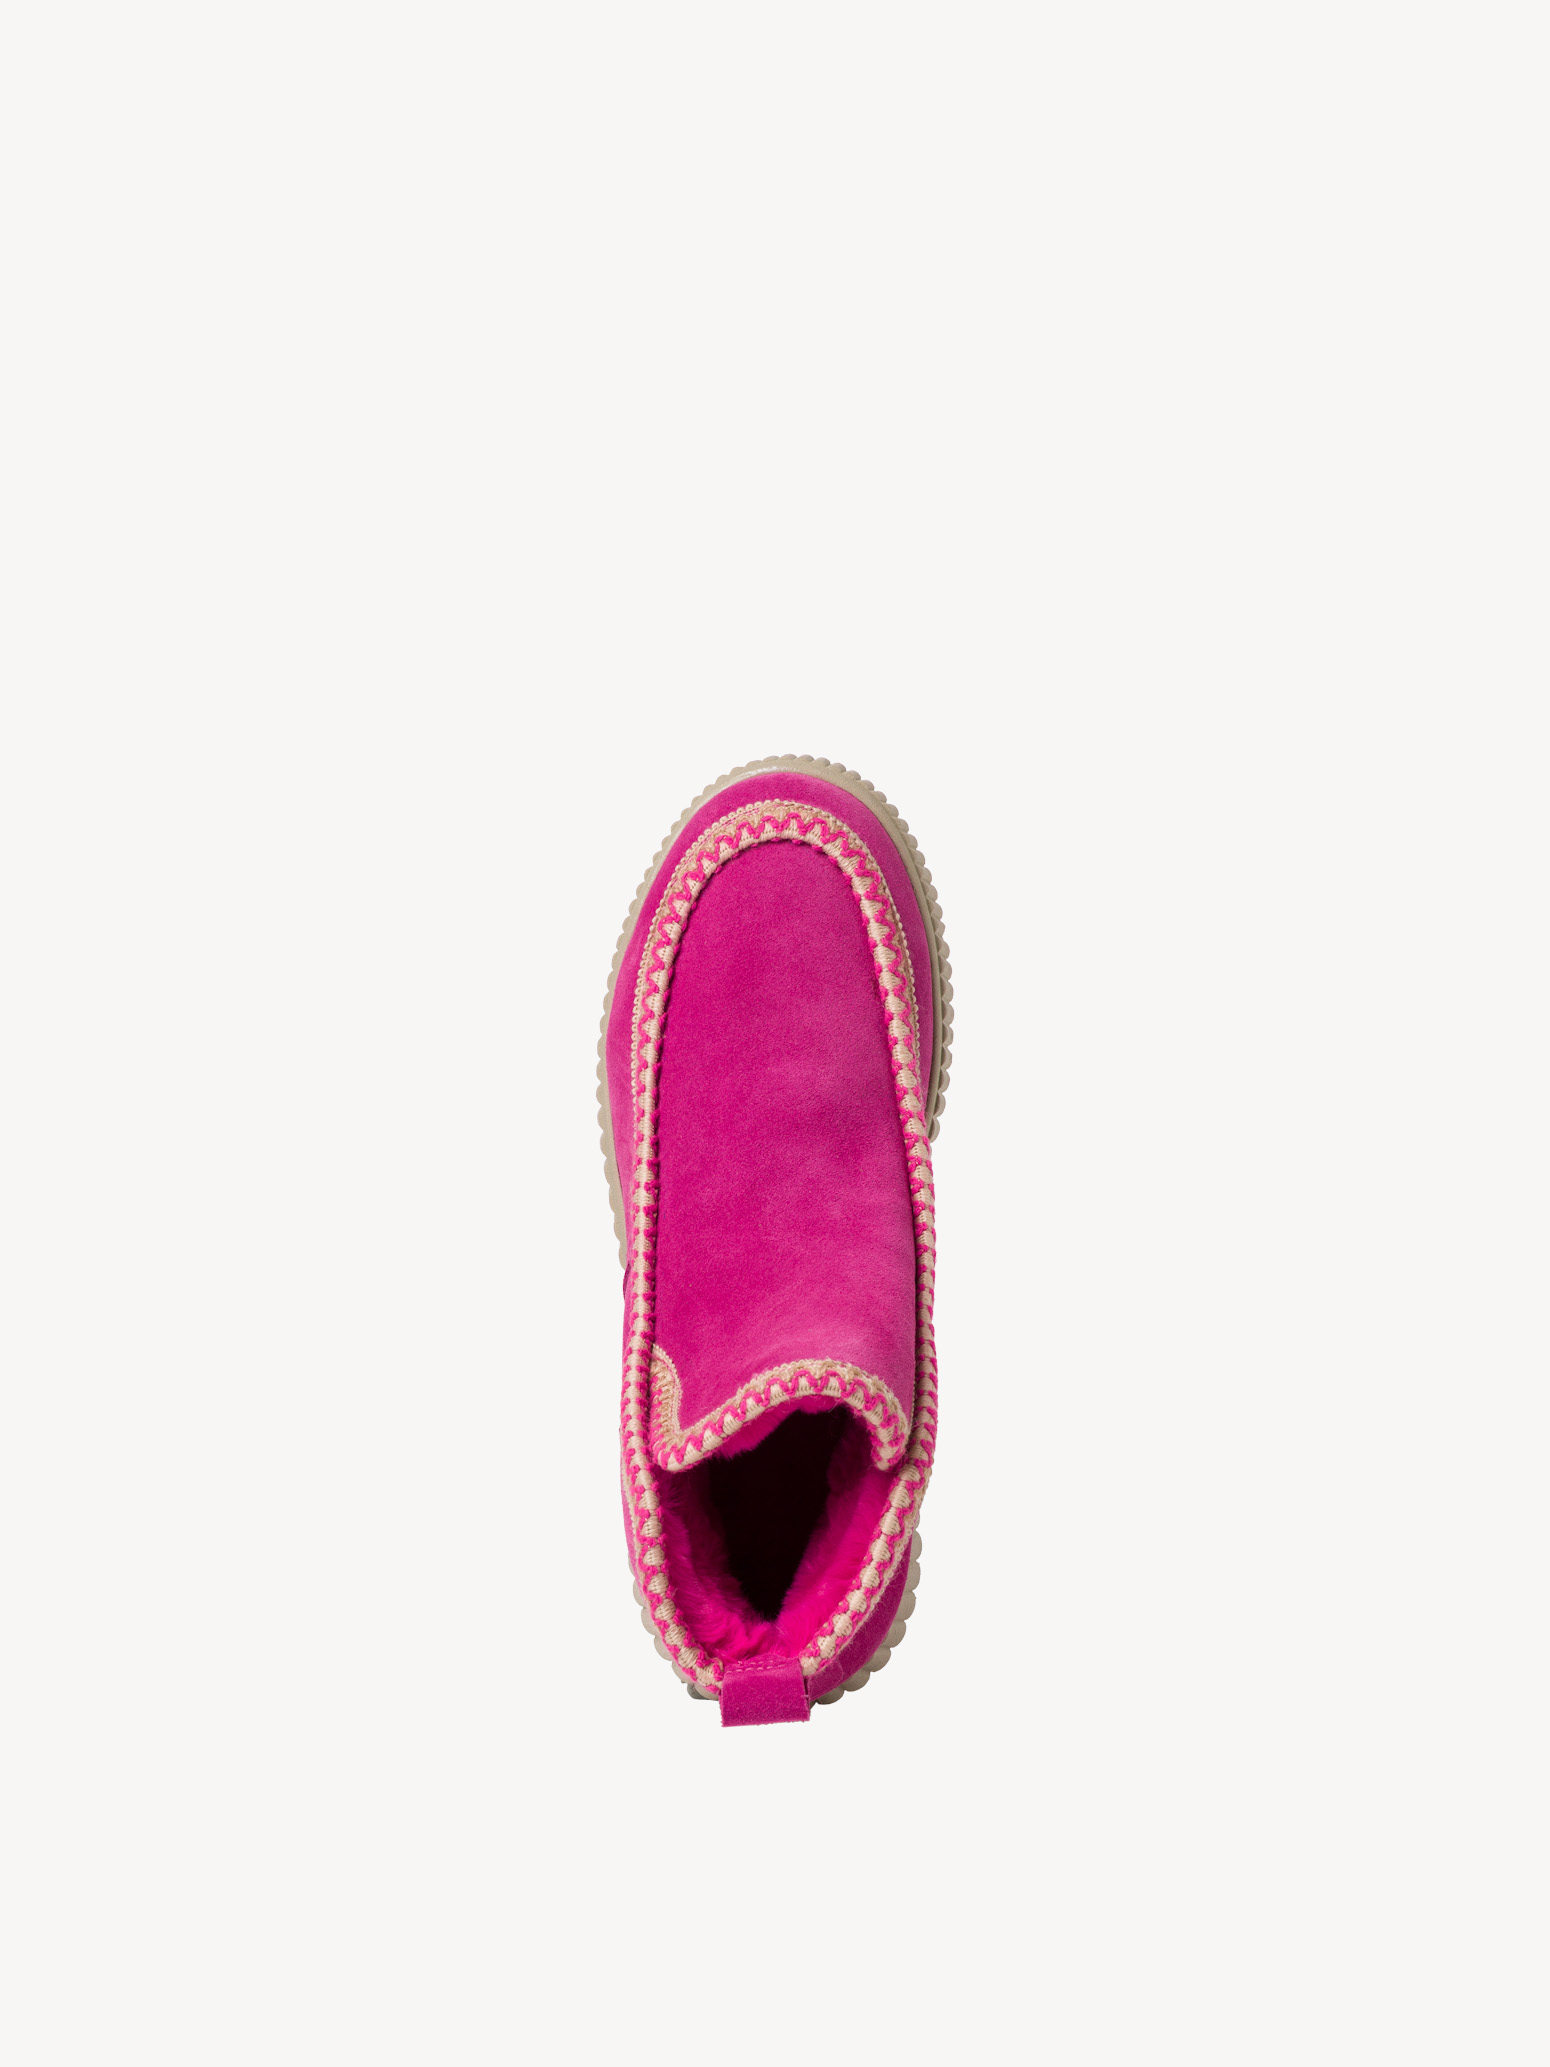 Leather Bootie - pink warm lining, FUXIA, hi-res